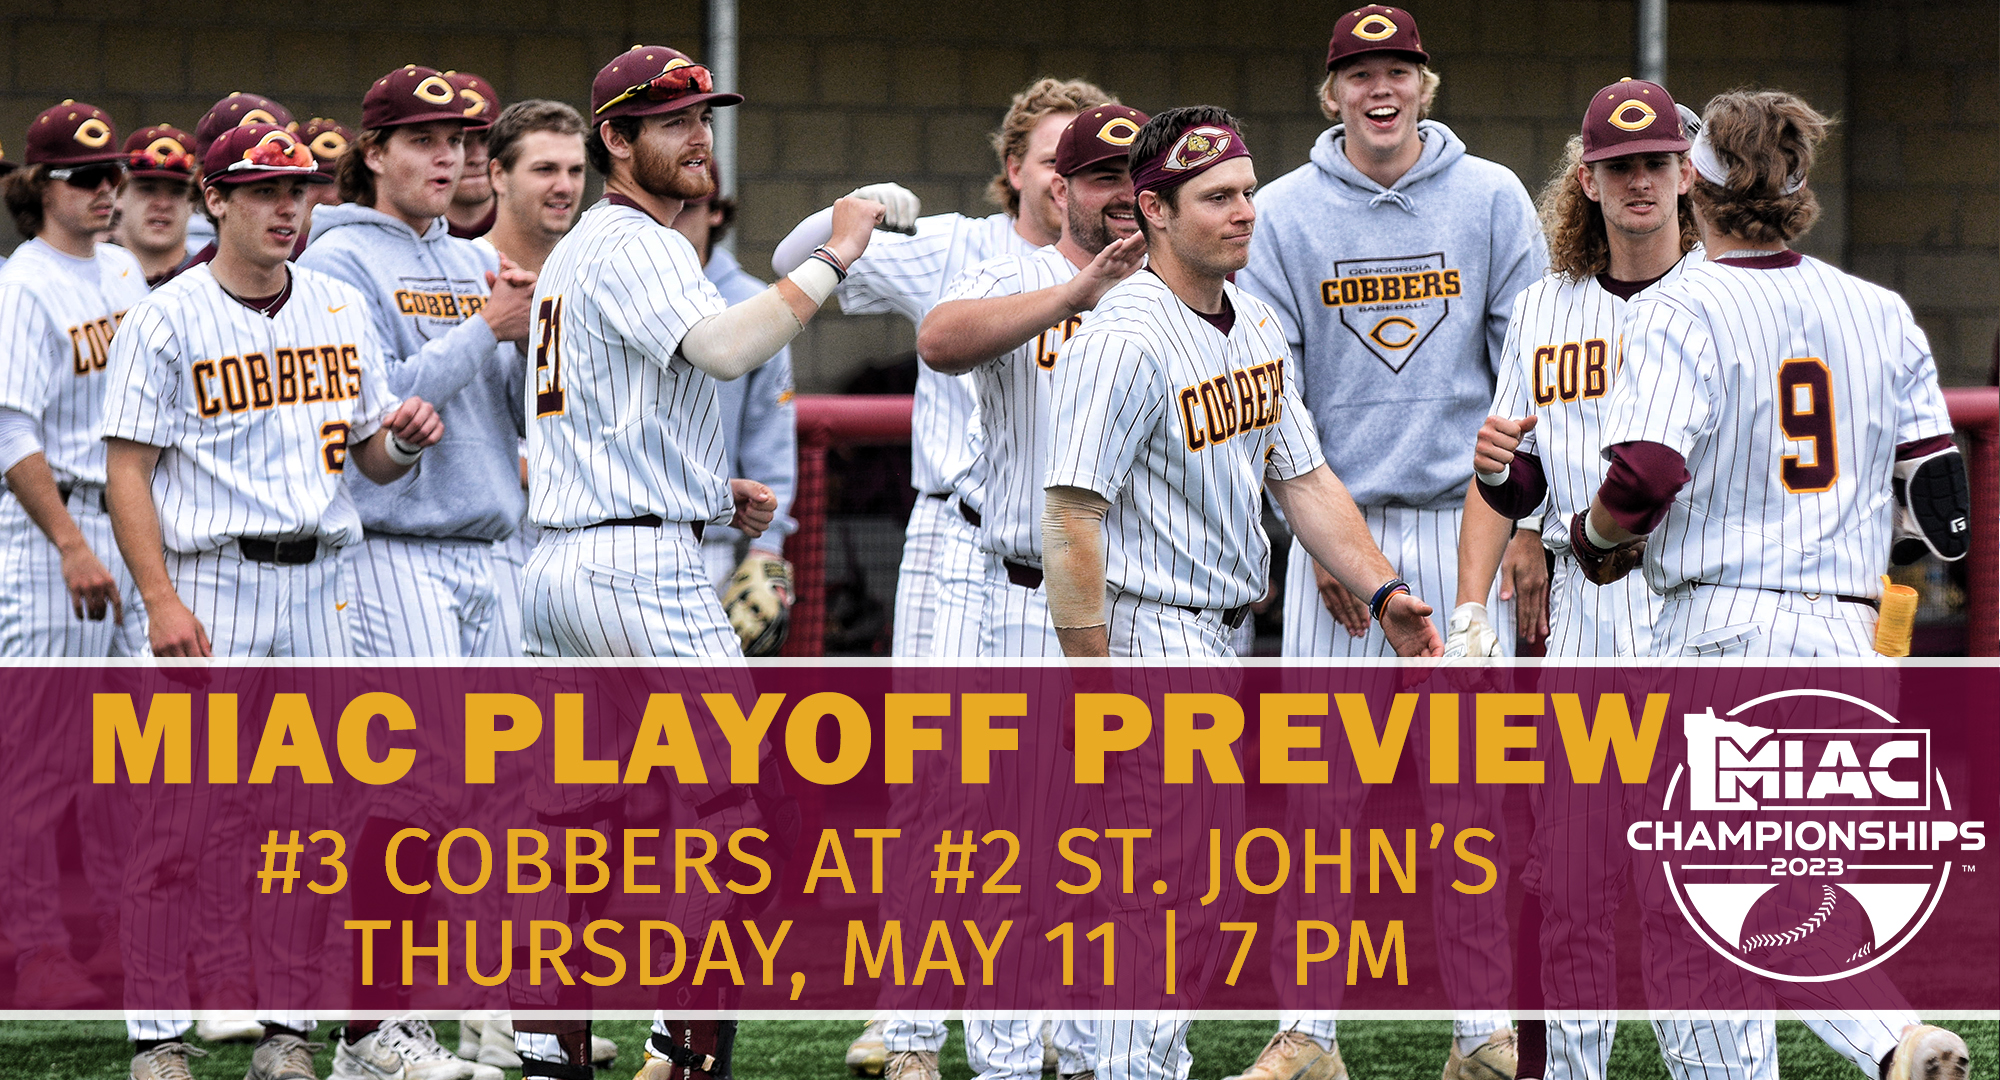 Concordia faces St. John's in the first round of the MIAC playoffs. The two teams combined for 37 runs and 45 hits in the regular-season DH.